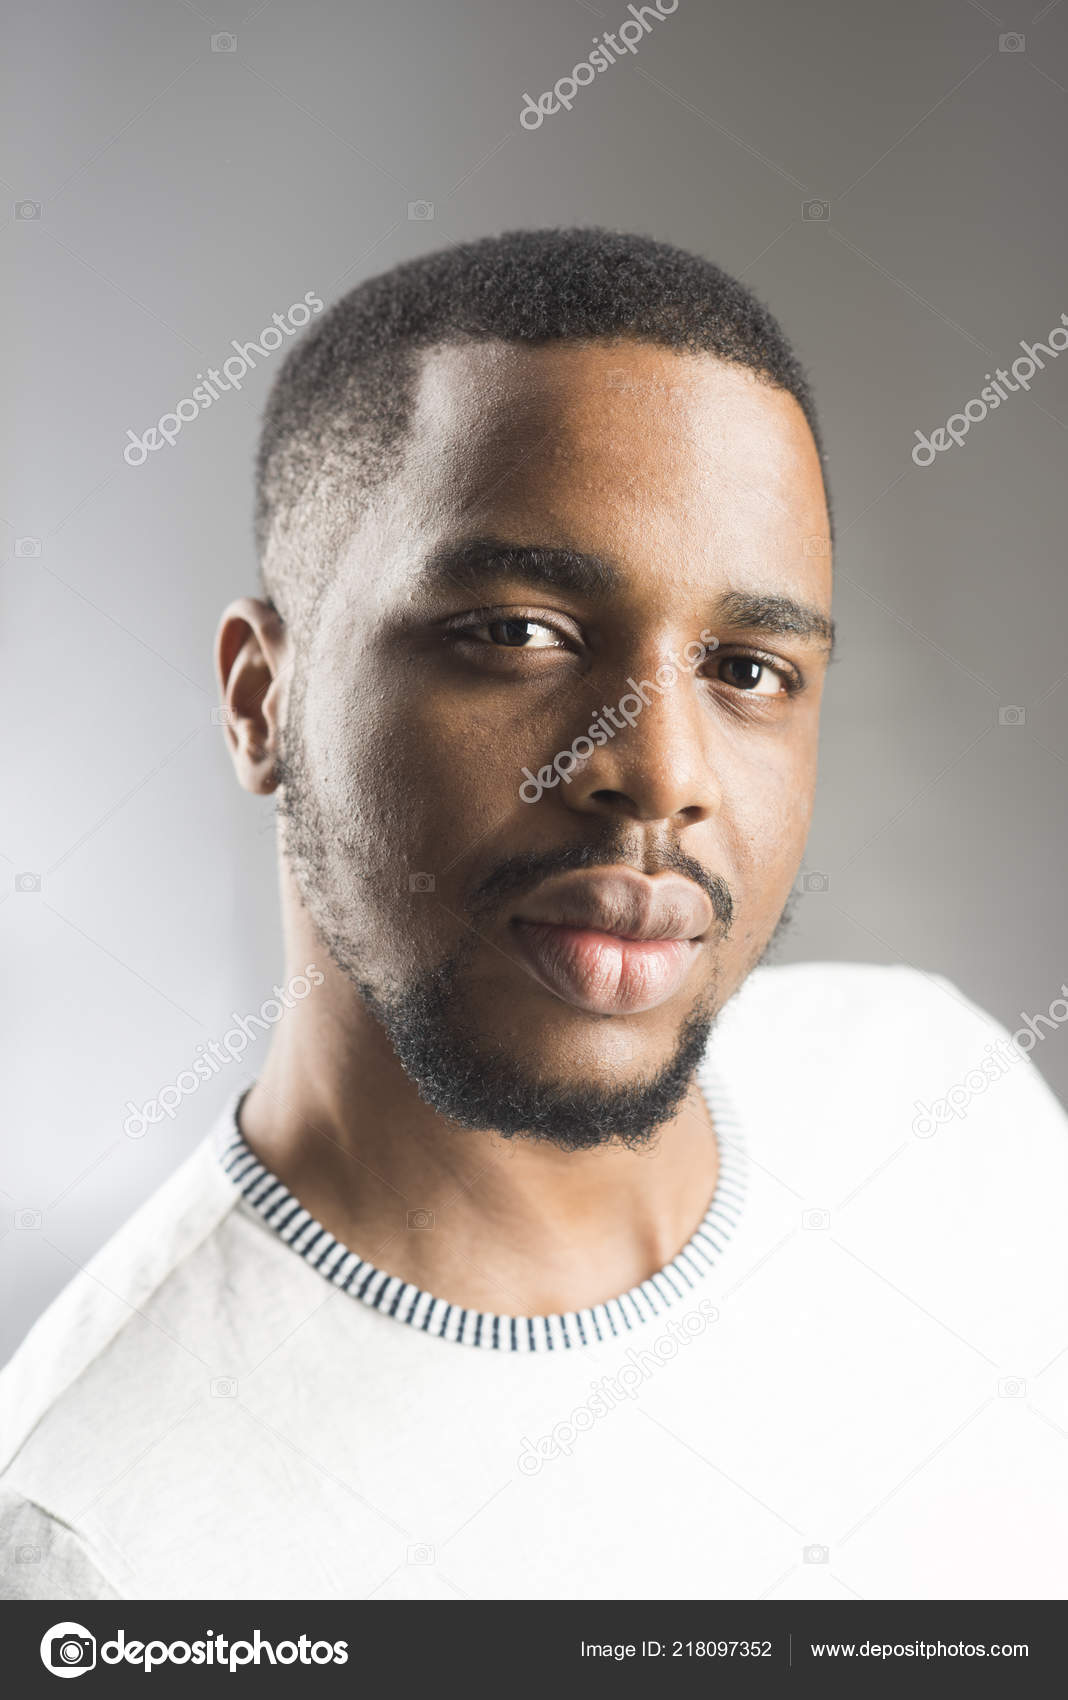 African Peoples Beauty Concept Macho With Beard And Smooth